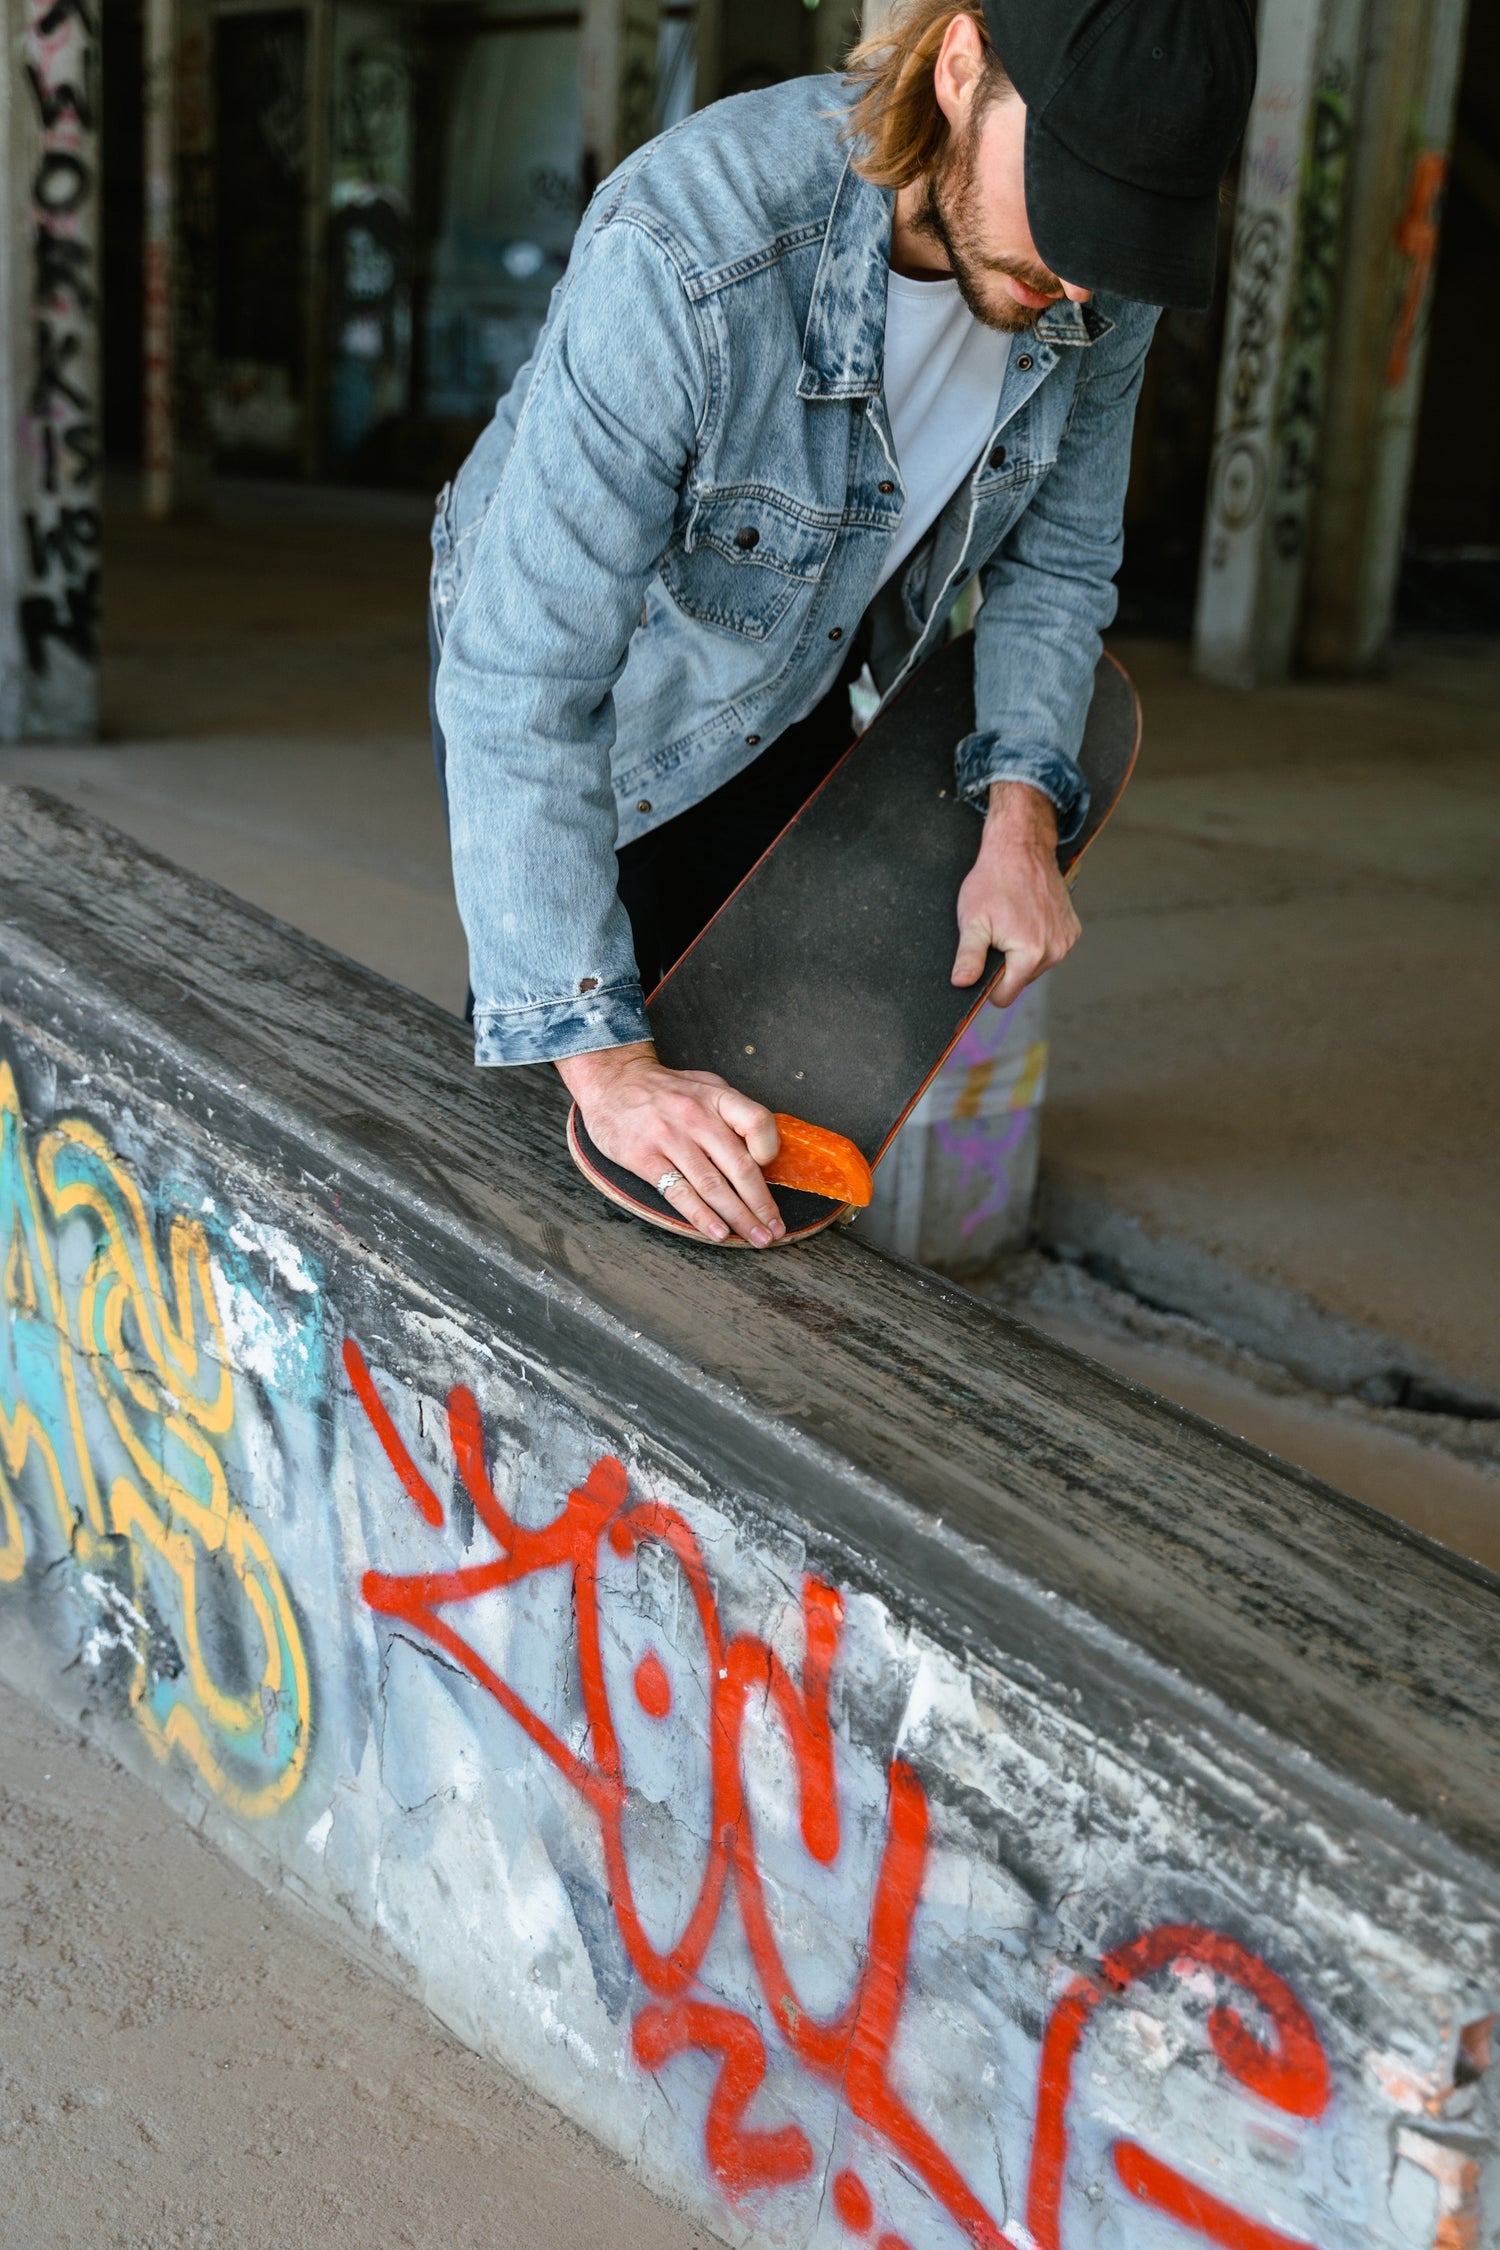 Skateboarder Waxing a Ledge for Grinds